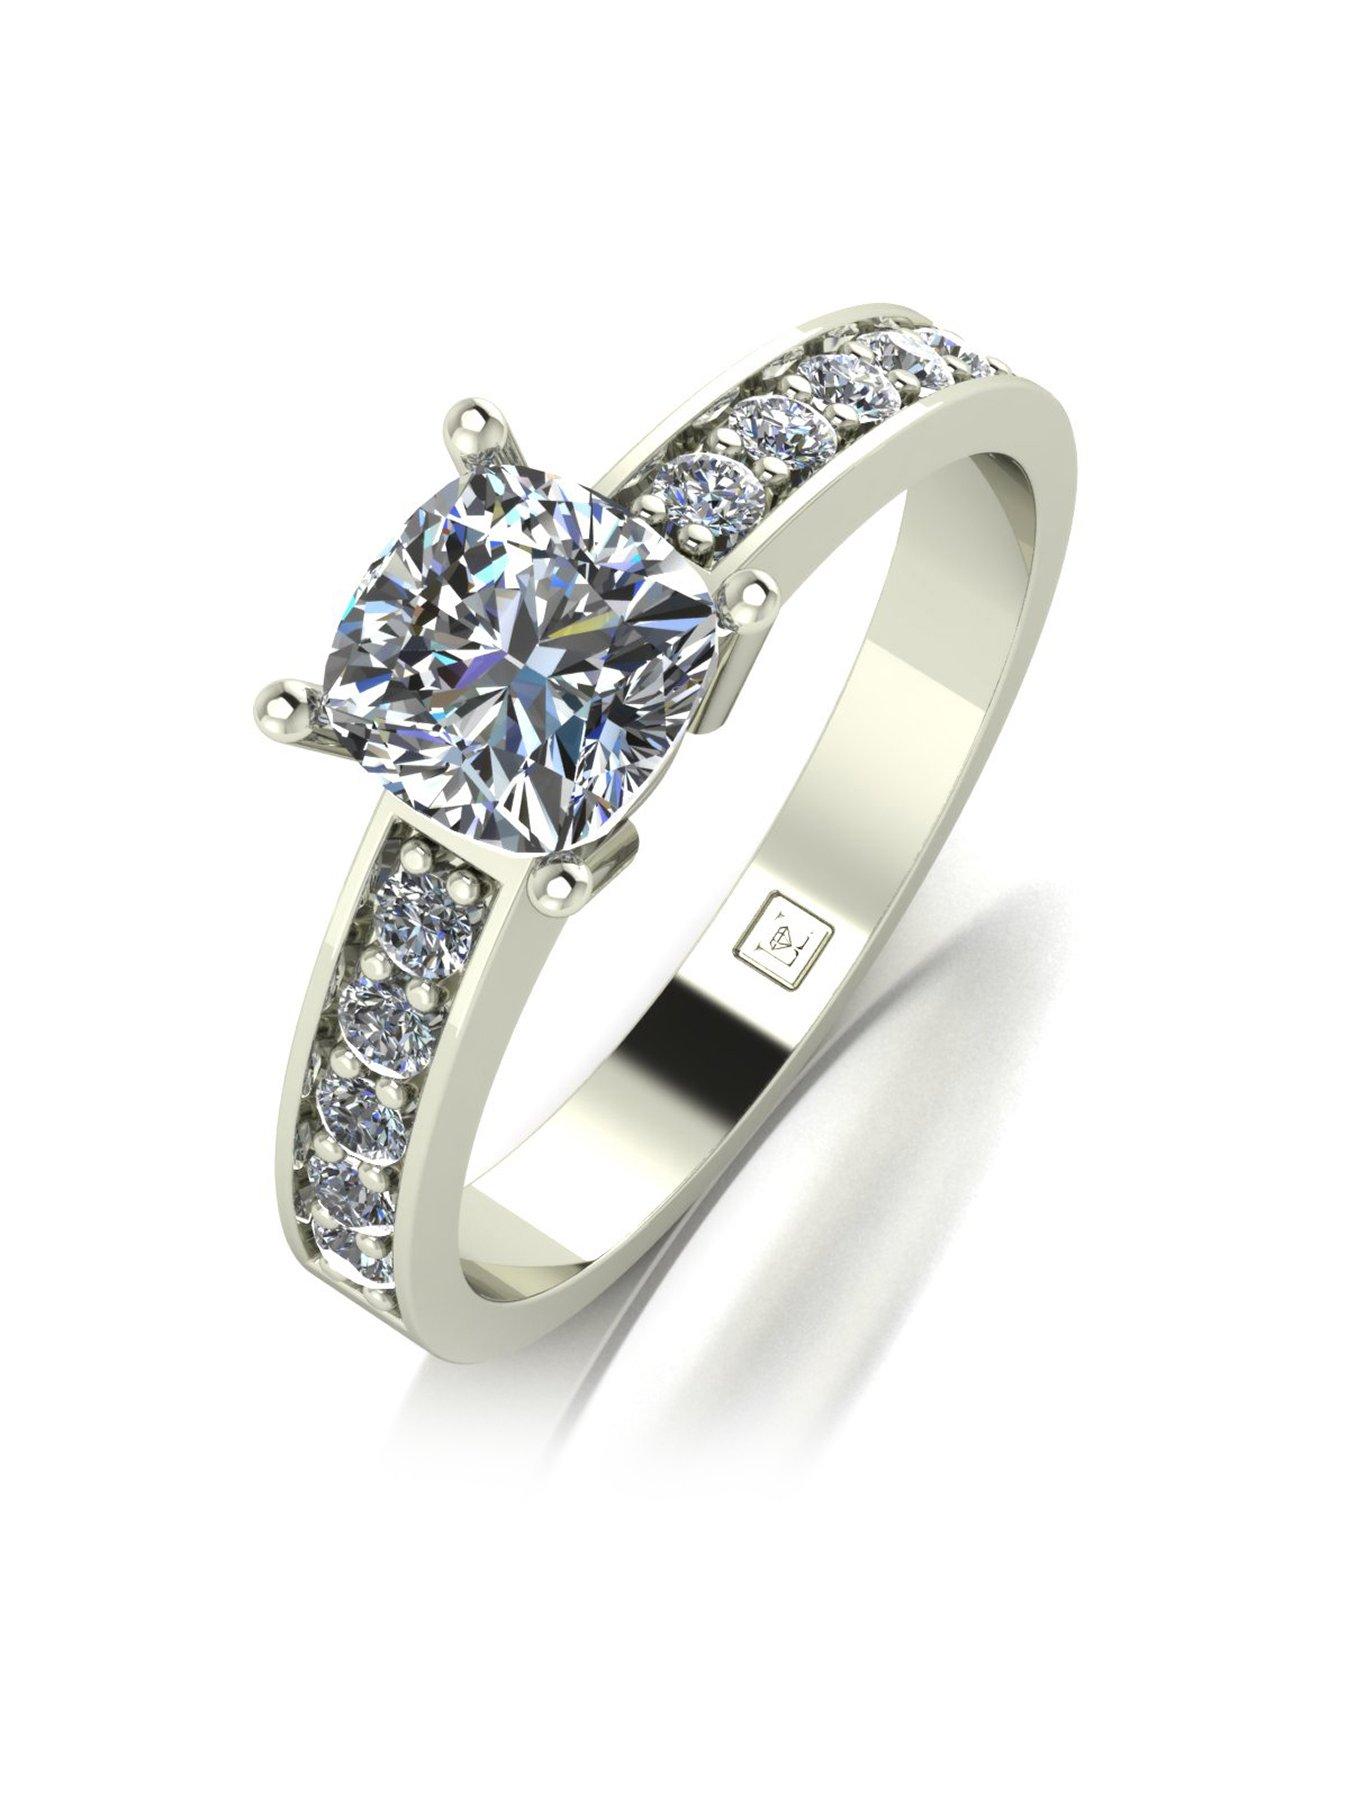 Details about   1.05 Ct Off White Round Moissanite Engagement White Gold Filled Ring 